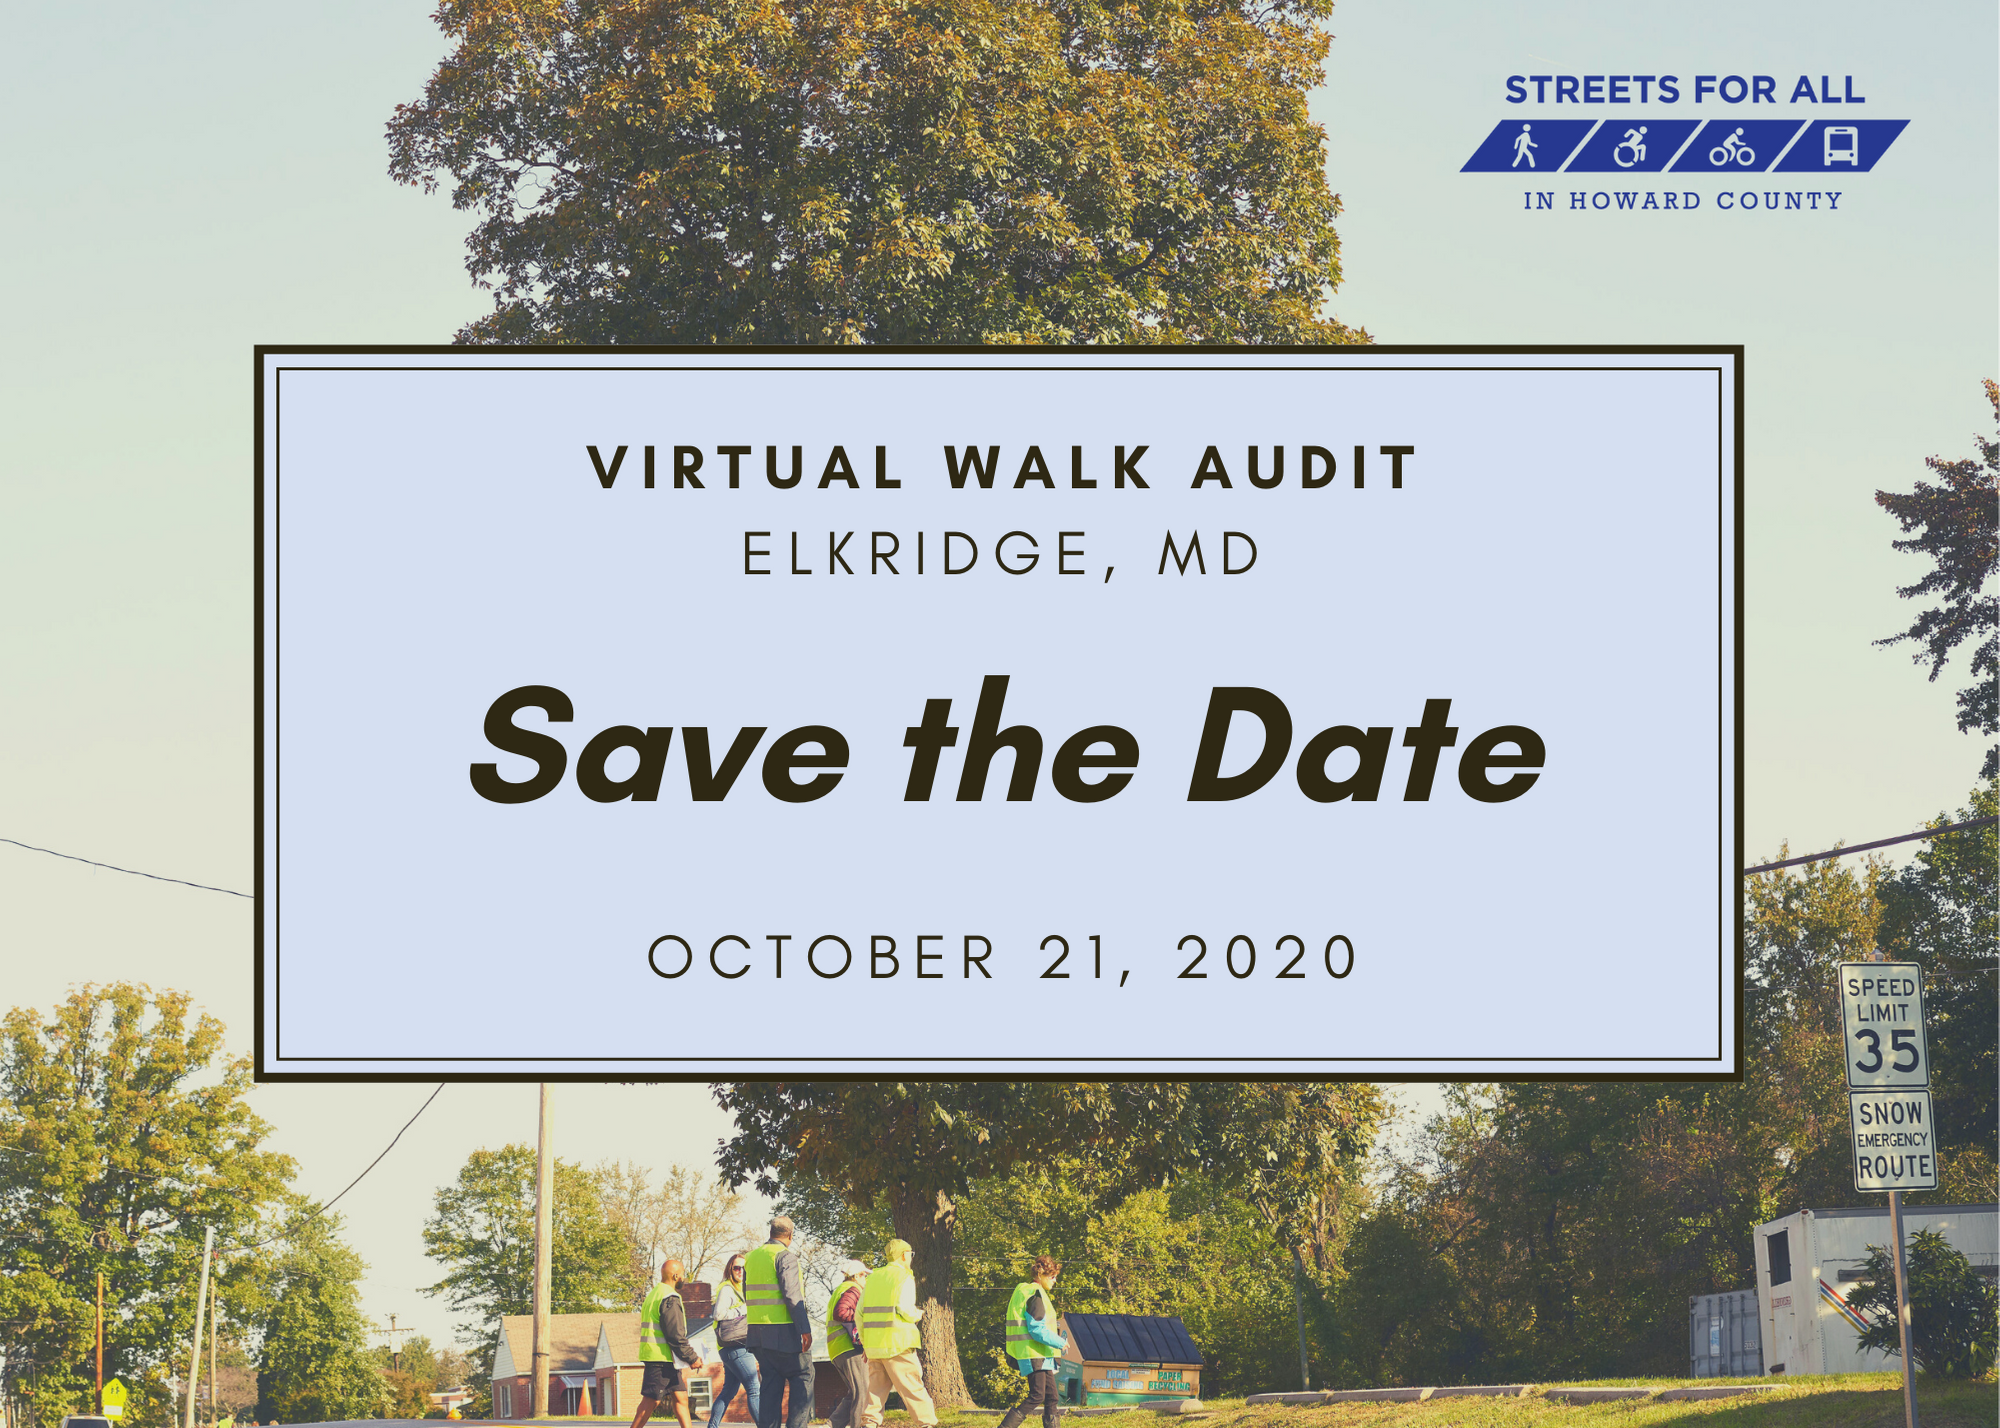 We need you! Register now for Howard County’s first-ever VIRTUAL walk audit